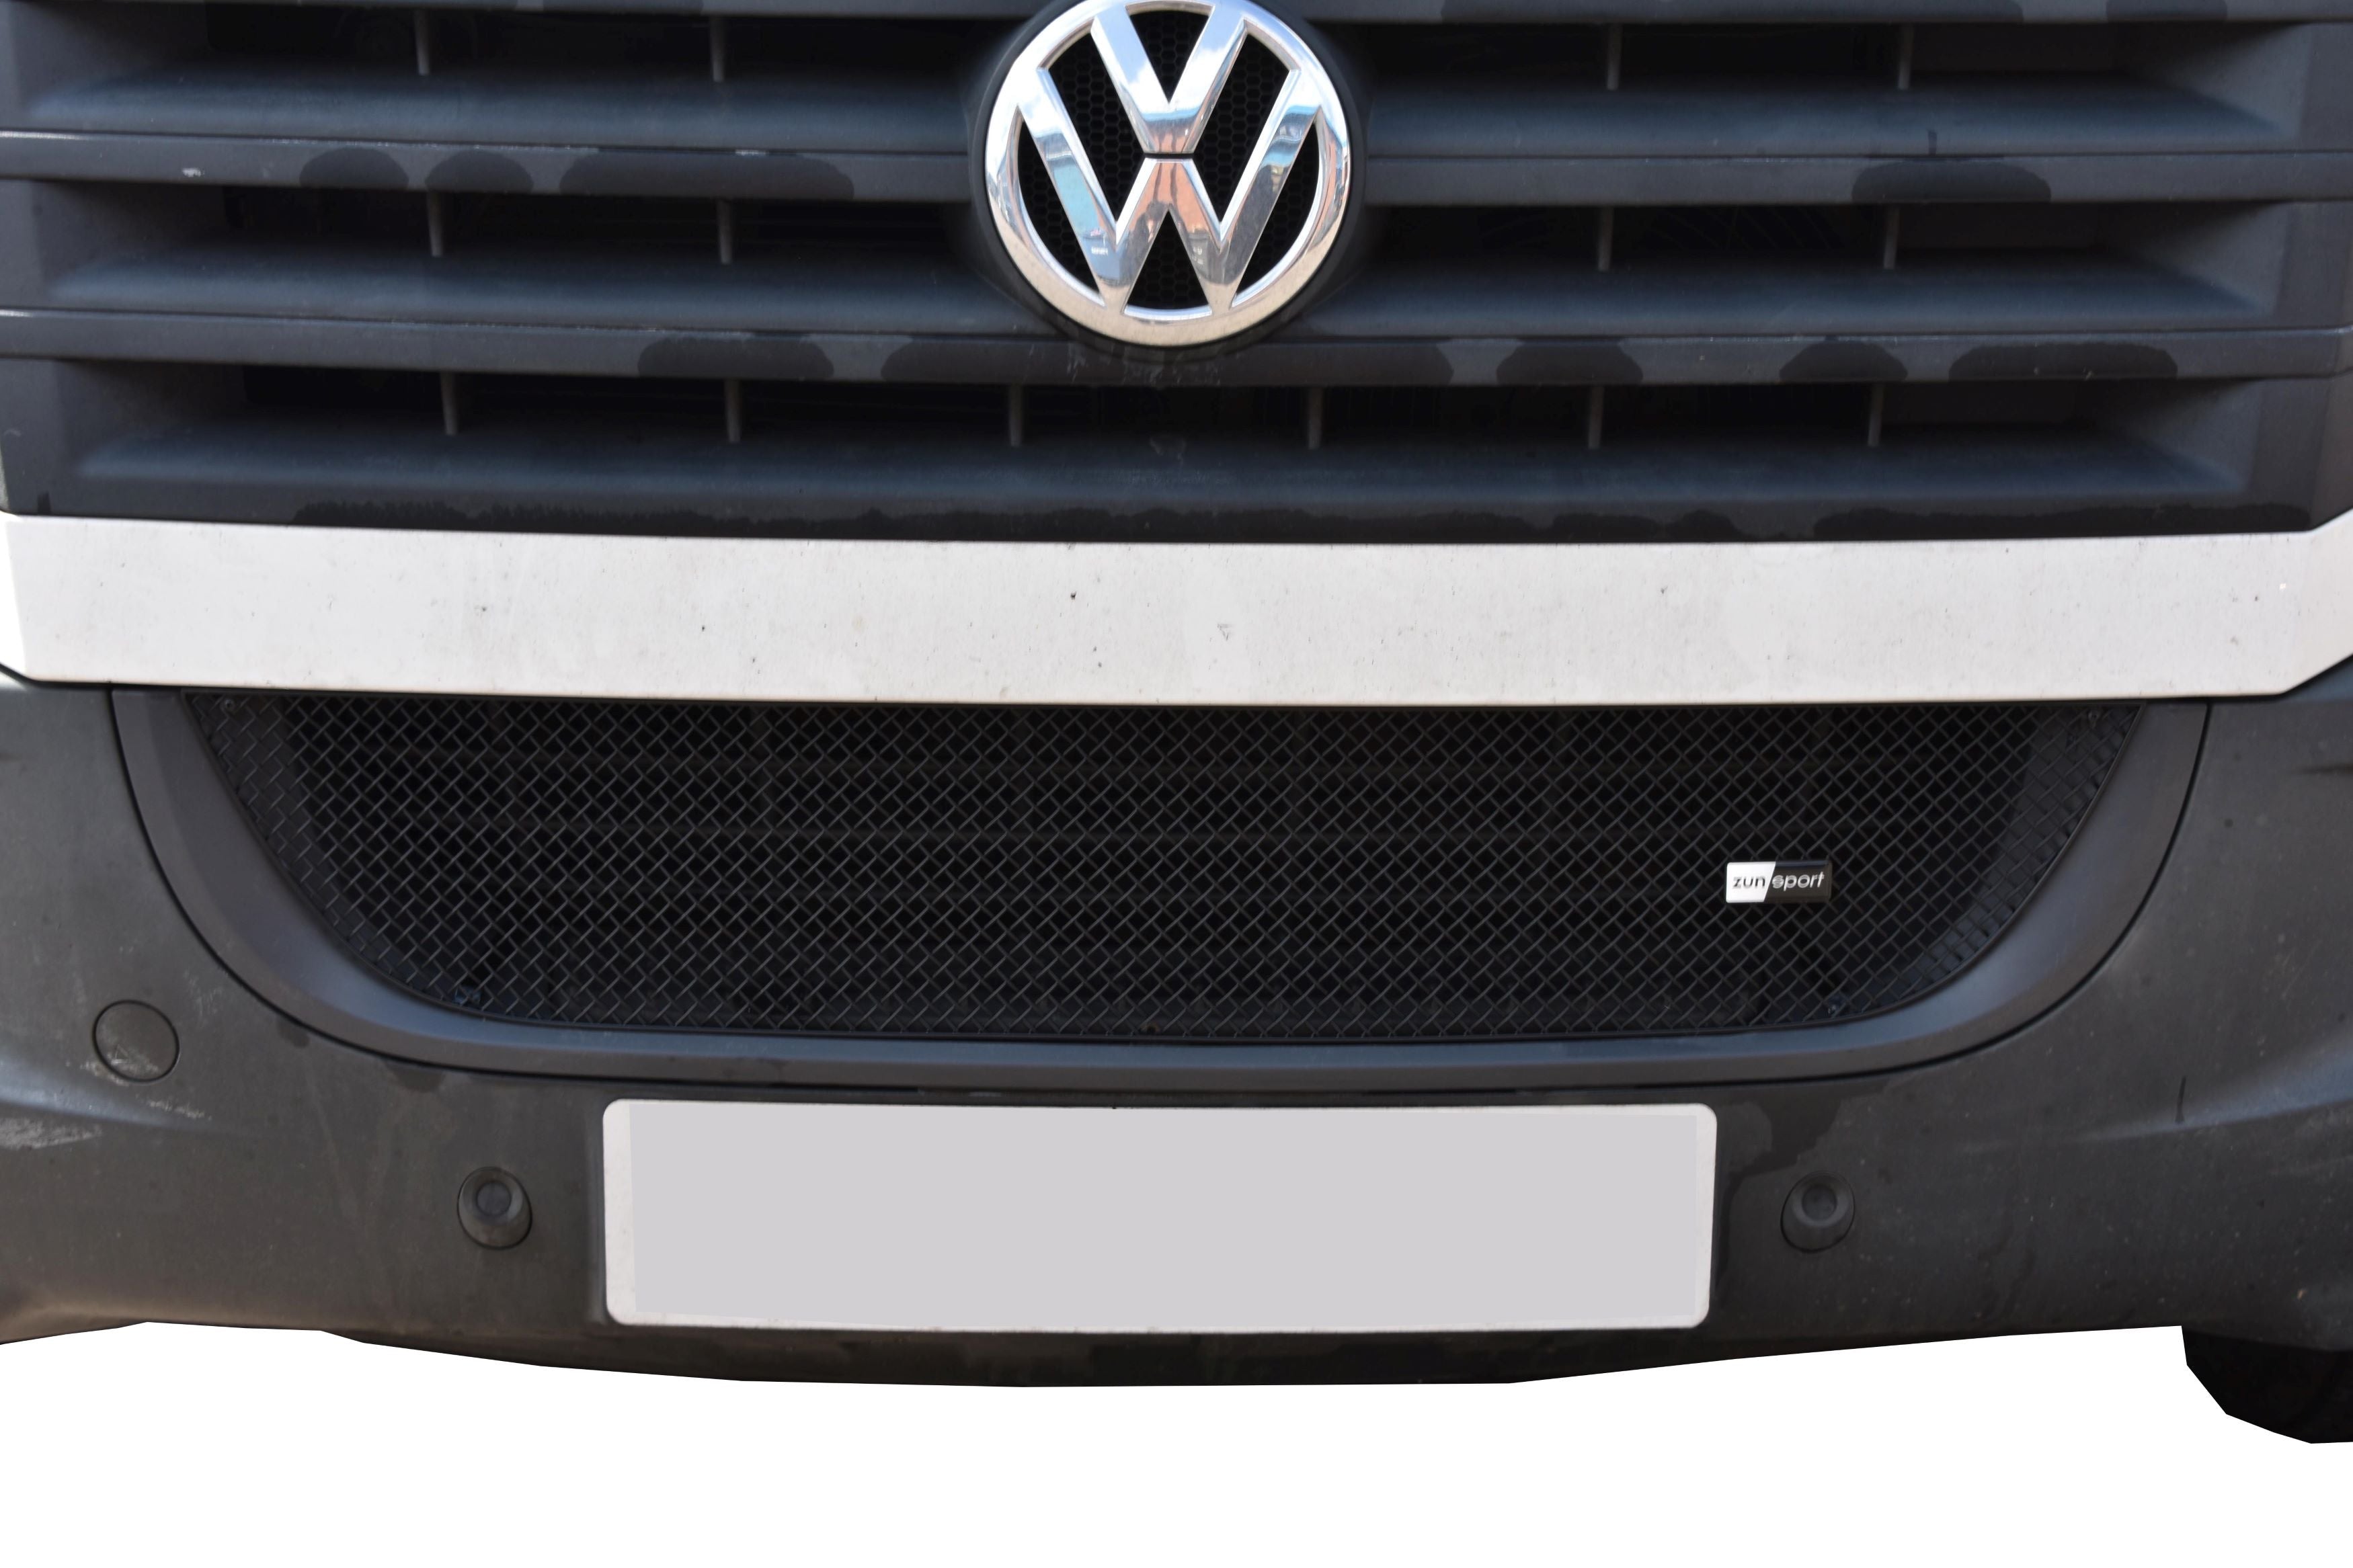 Zunsport VW Crafter 2011 - 2017 Lower Grille